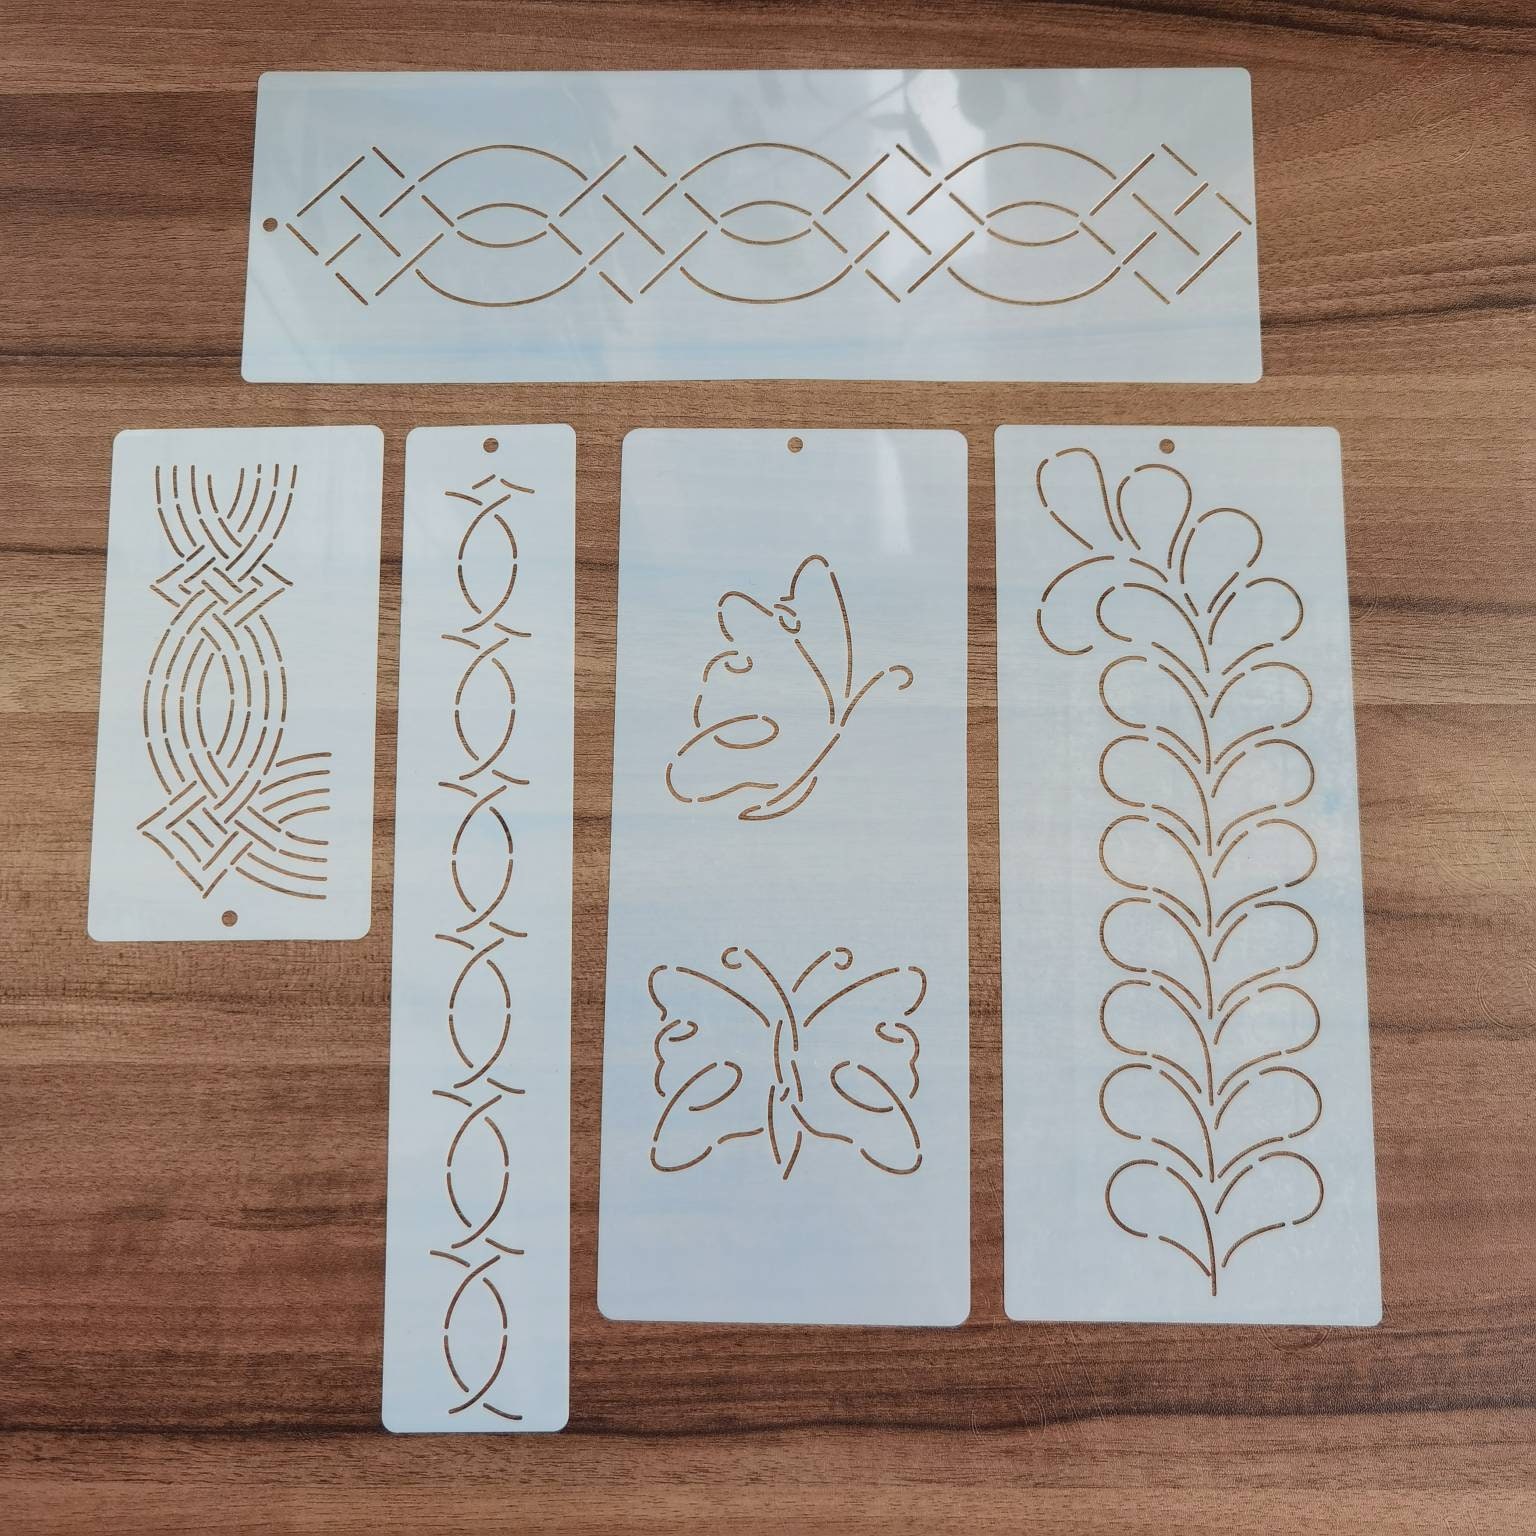 Border and Corner Feather Quilting Stencils - with Square Block Stencil | 3  Quilting Creations Plastic Quilt Stencil Set for Borders, Background